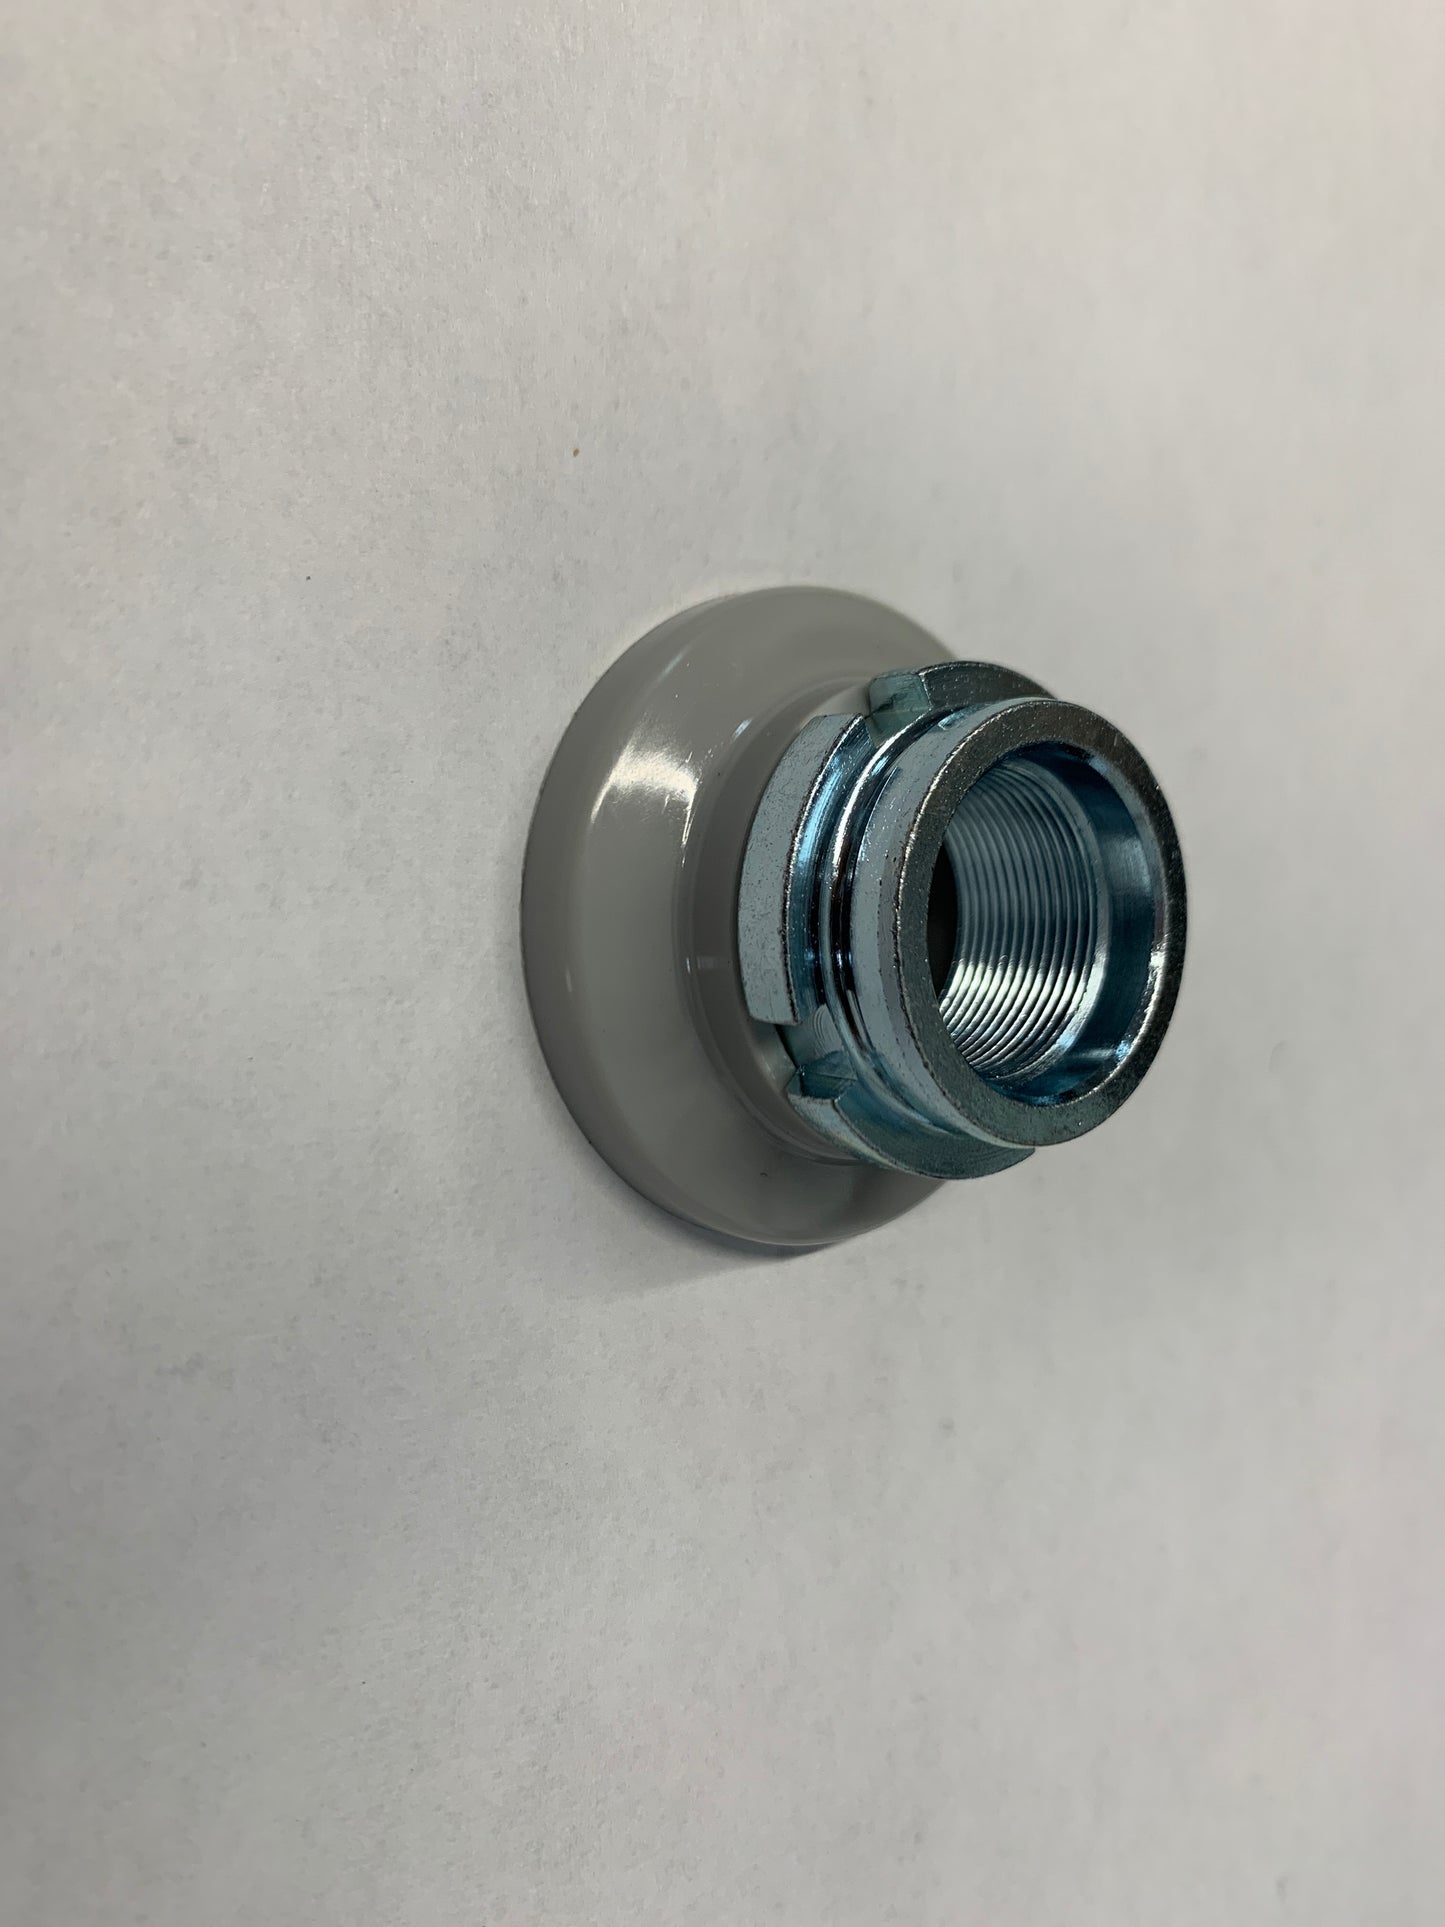 Neck bearing nut /cover